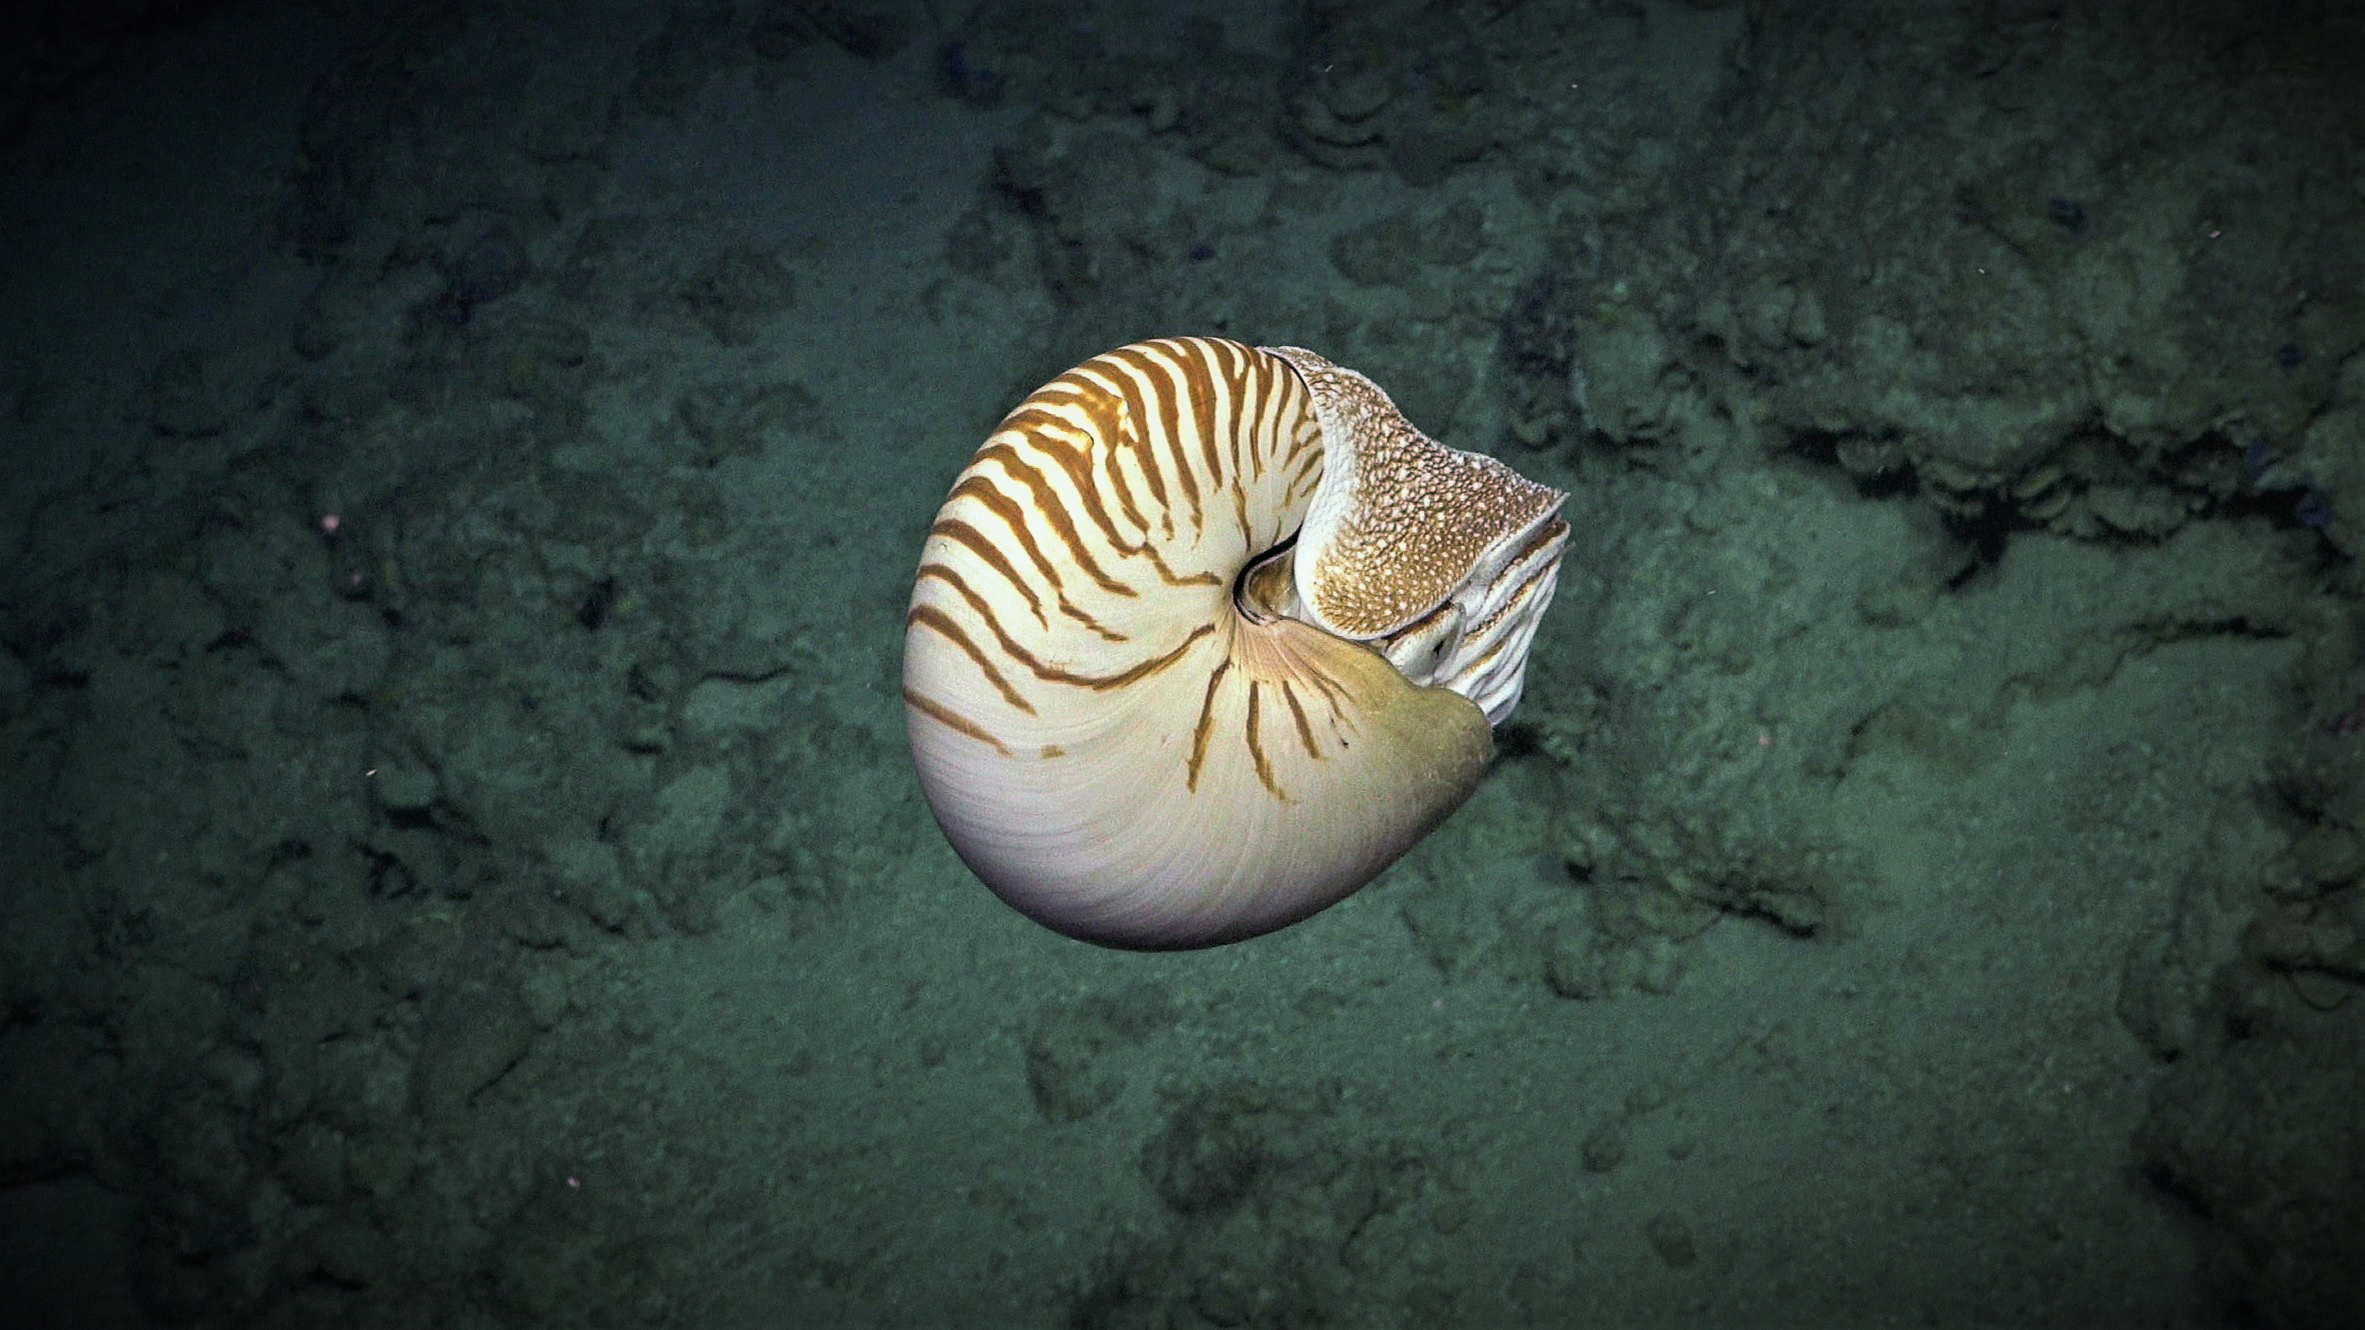 A nautilus swims past the ROV SuBastian on Dive 406 (April 12th 2021). The nautilus is the sole extant family of the superfamily Nautilaceae and of its smaller but near equal suborder, Nautilina. It comprises six living species in two genera, the type of which is the genus Nautilus. Principal Investigator Dr Karen Miller from Australian Institute of Marine Science (AIMS) smiles while watching the science camera feed from the ROV SuBastian’s first dive. Dr Karen Miller is leading the expedition that is exploring mesophotic coral at Ashmore Reef. Ashmore Reef is one of Australia’s most important protected Marine Park Areas (MPA’s). It is hoped the discoveries and outcomes for the expedition will provide visibility and new insights into the diversity, ecology, and importance of mesophotic reefs to ecosystem integrity in Australia and around the world.